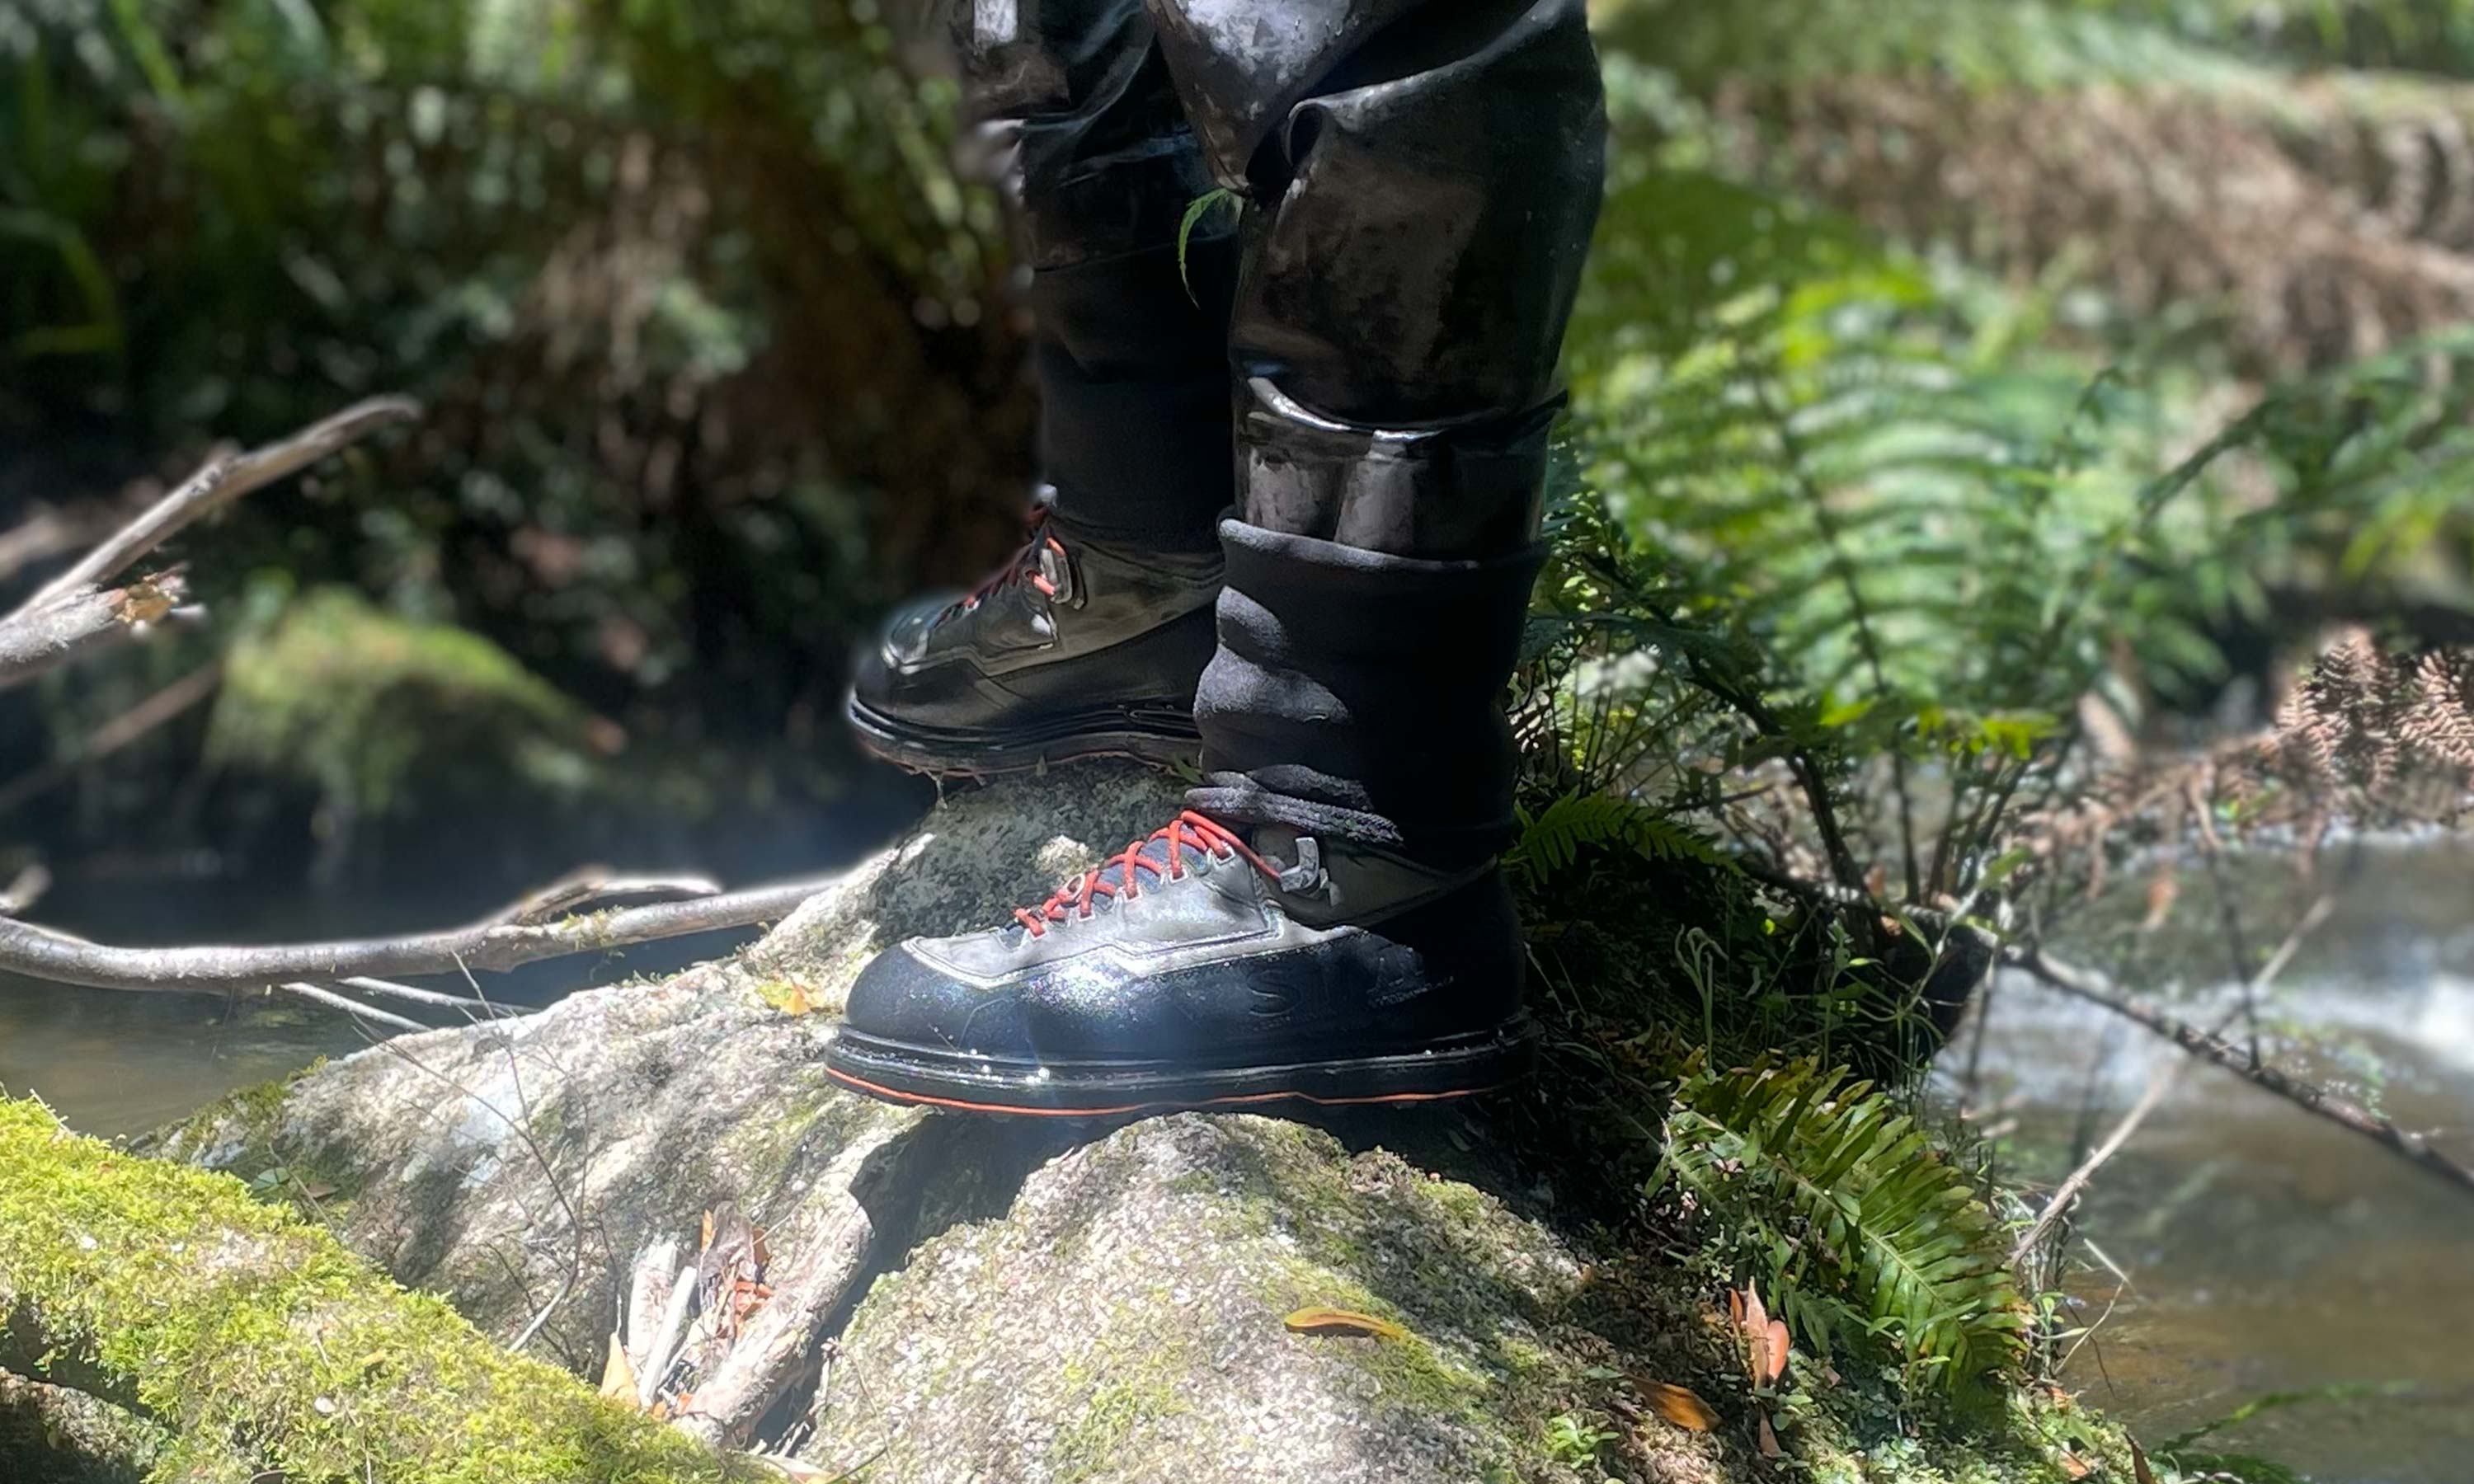 Simms G3 Boots & Flyweight Vest Pack | Review – Manic Tackle Project